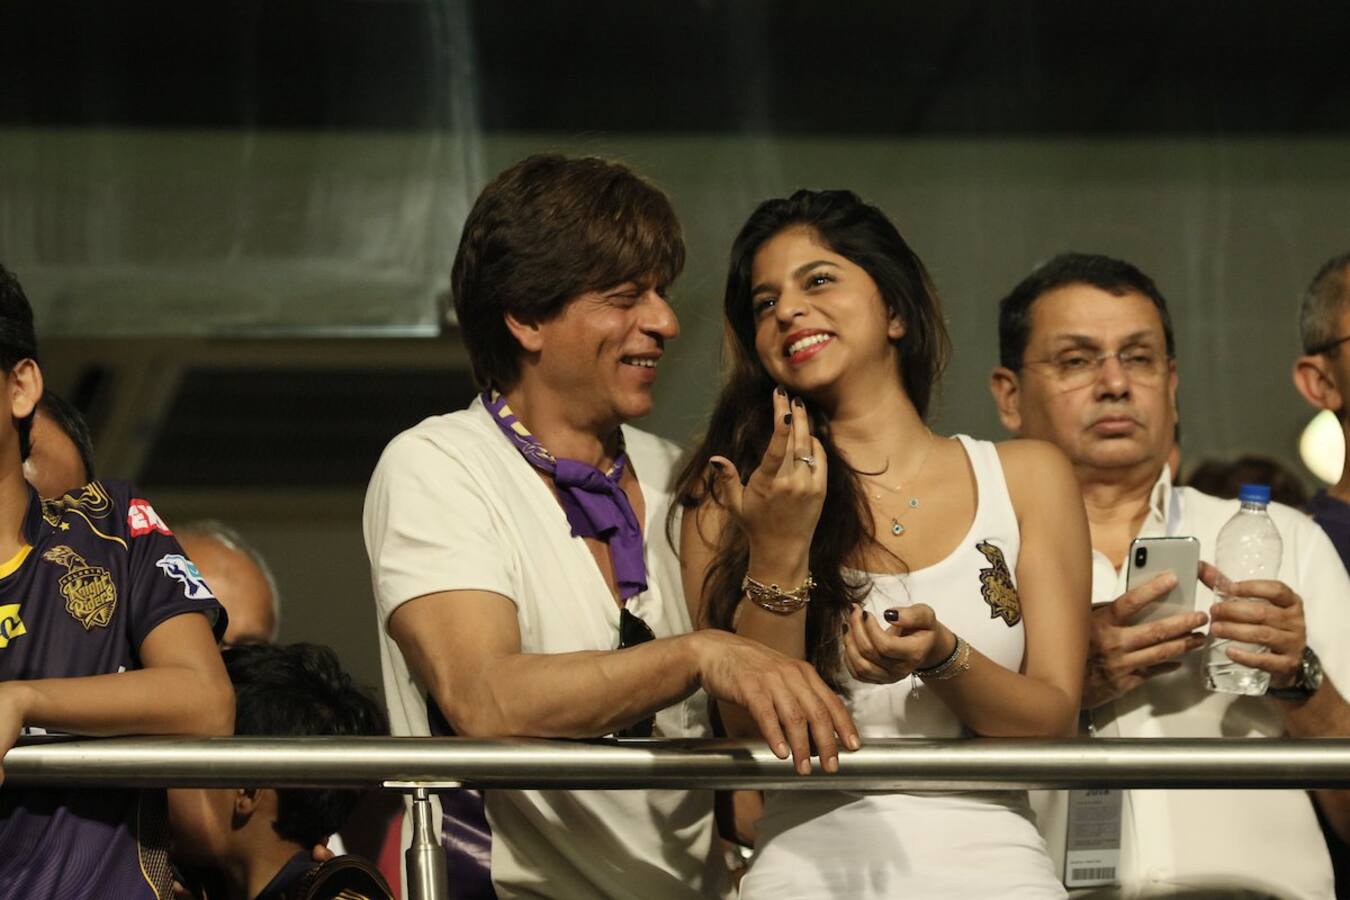 PICS! The many moods of Shah Rukh Khan and Suhana Khan as they cheered for their cricket team